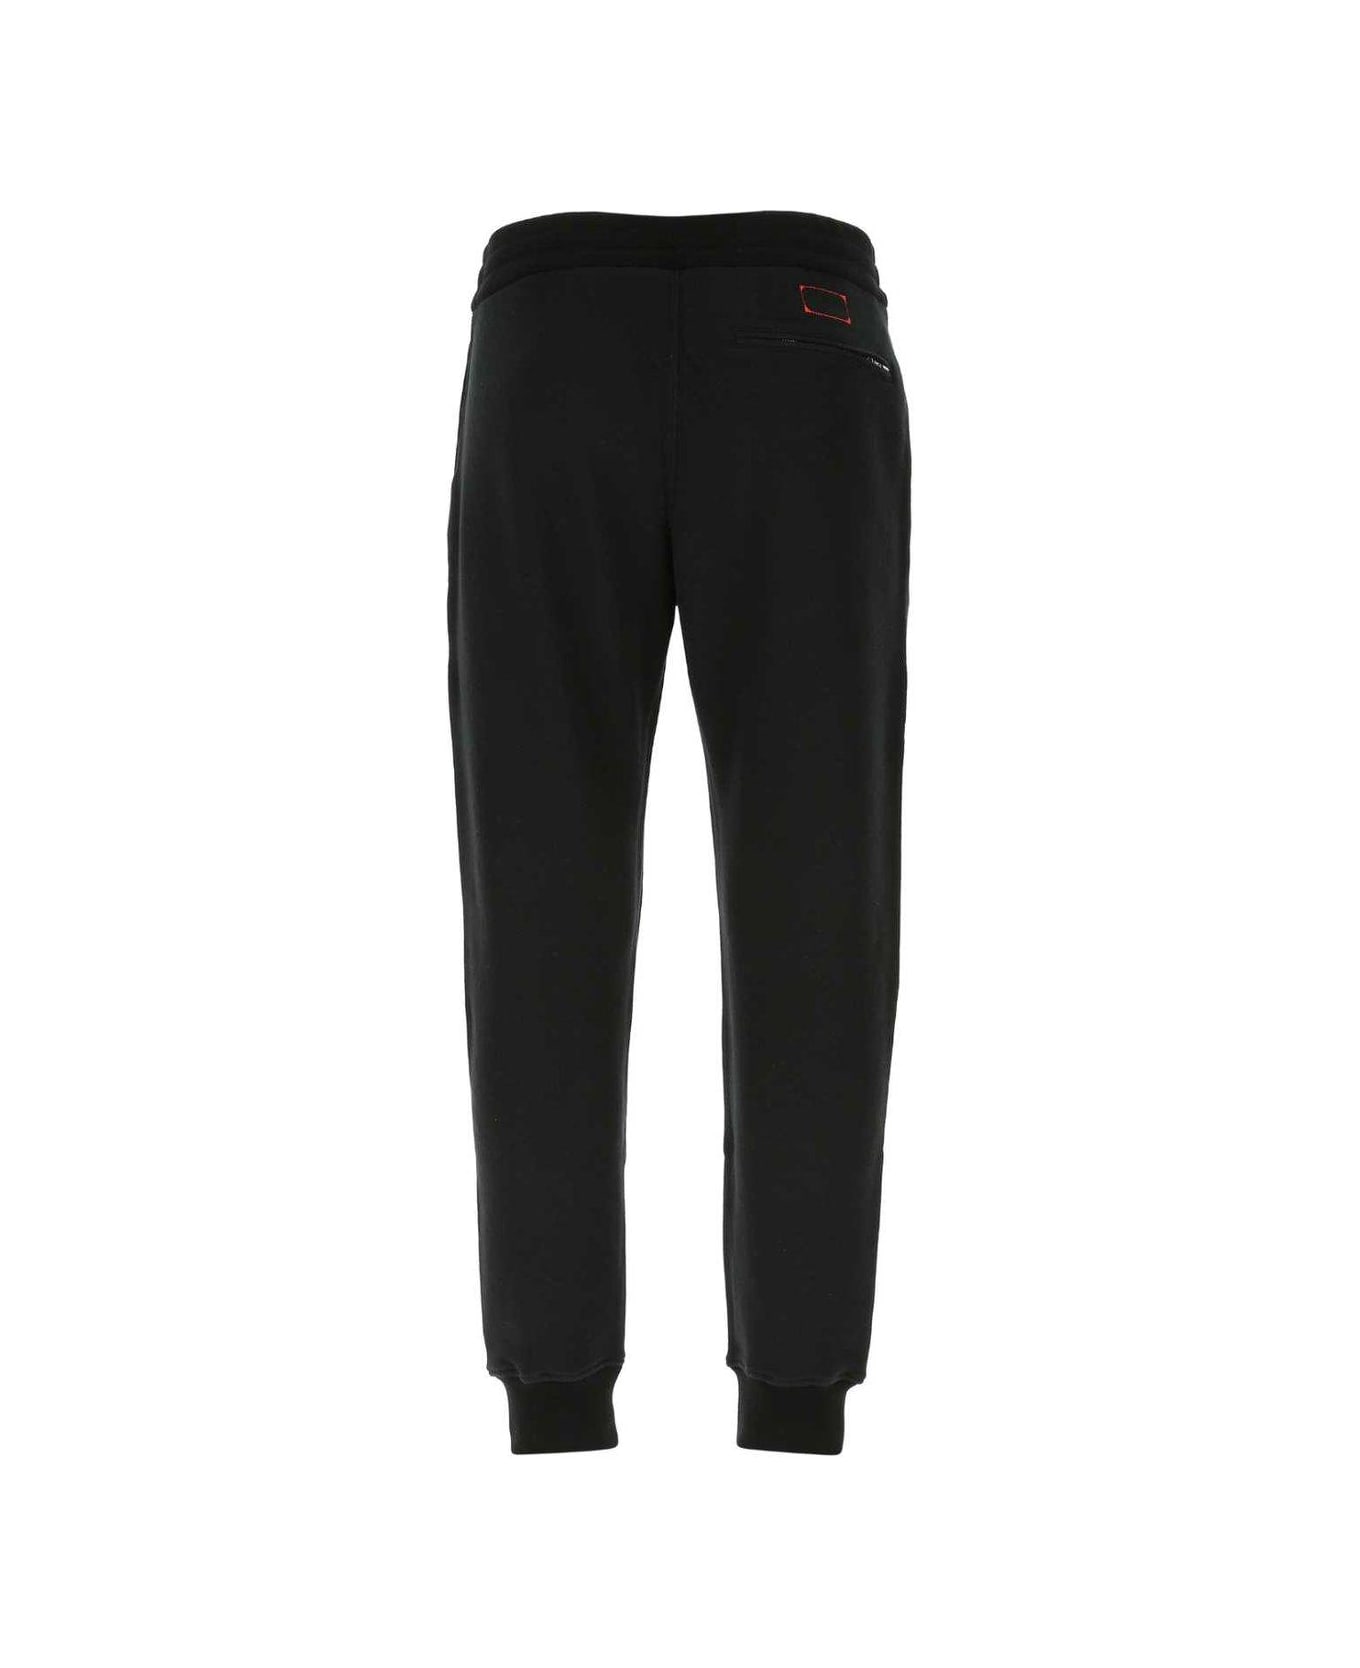 Alexander McQueen Logo Embroidered Track Pants - BLACK